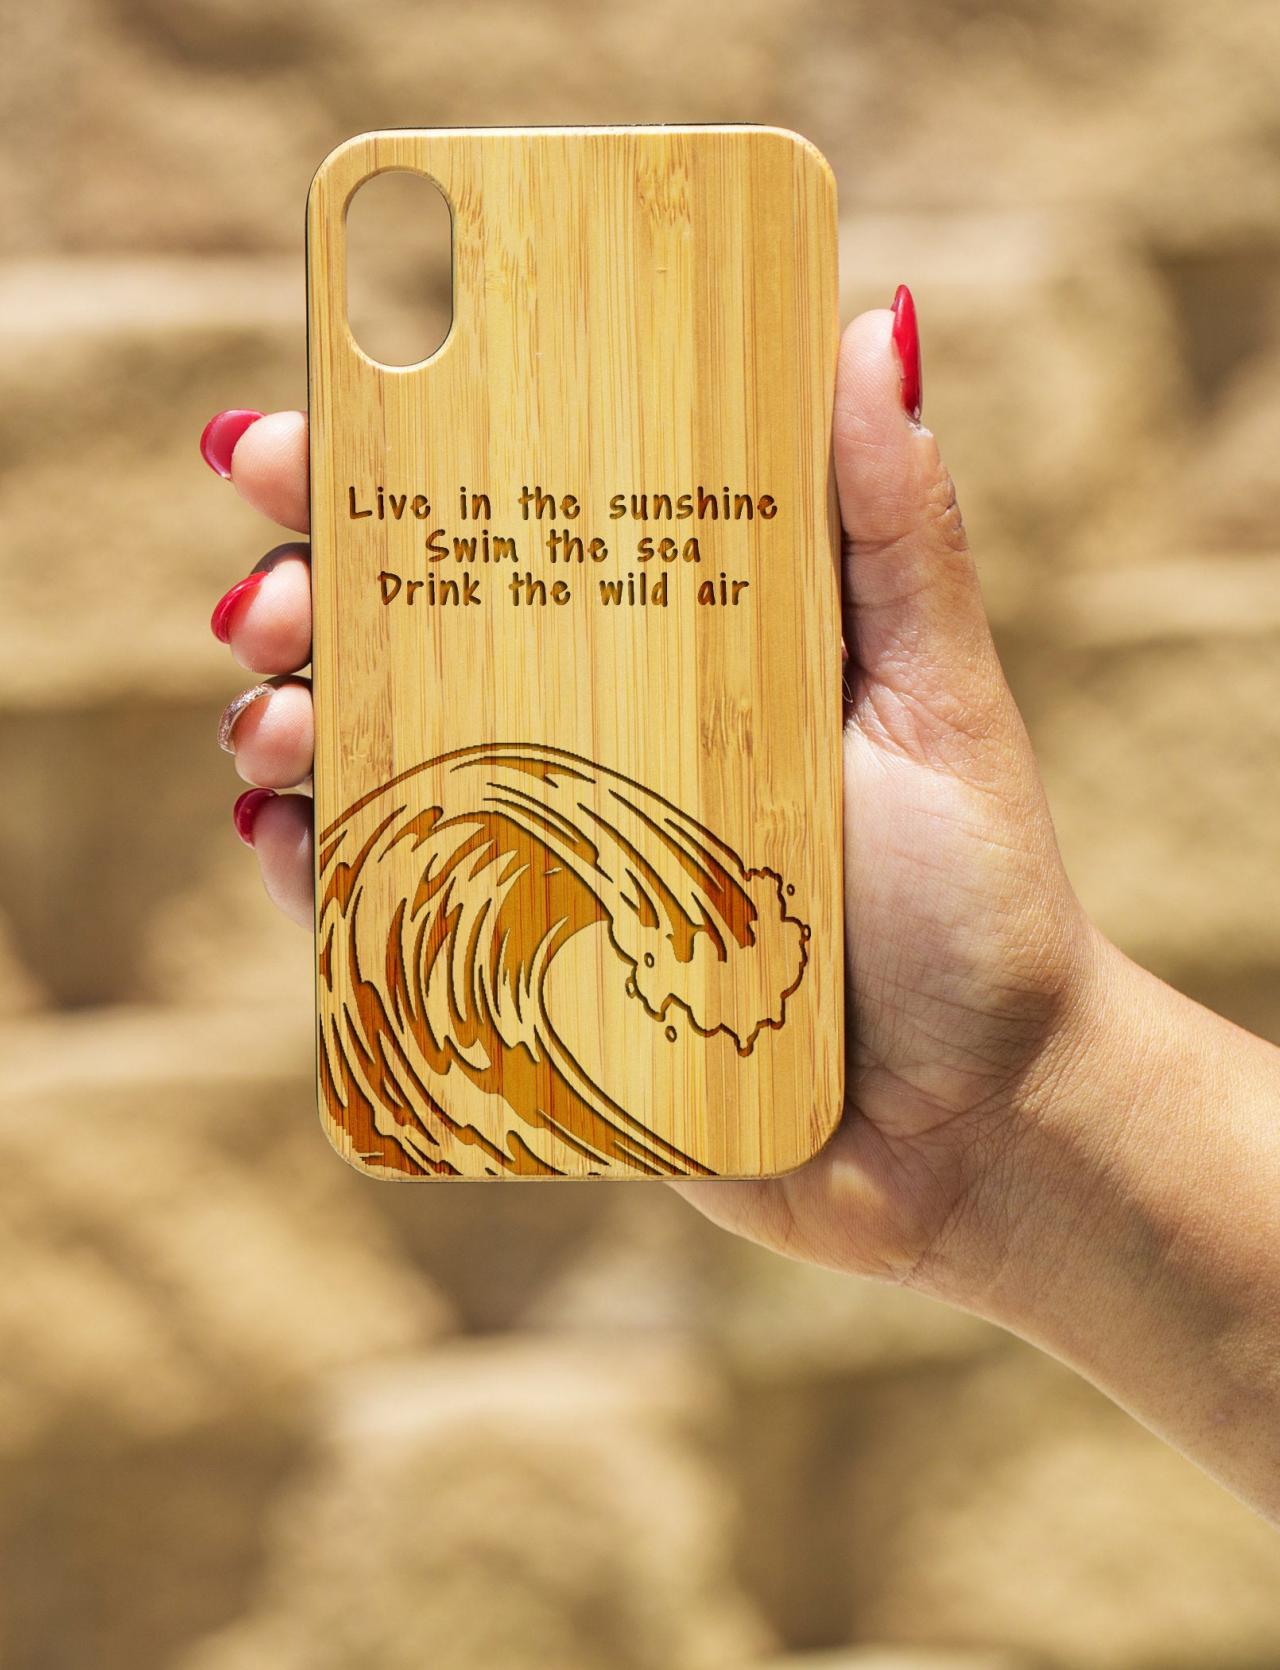 Ocean wave IPhone X Case, Engraved Iphone X case, Wooden Engraved Iphone X Case, Iphone case, Beautiful Gift for here,unique case.